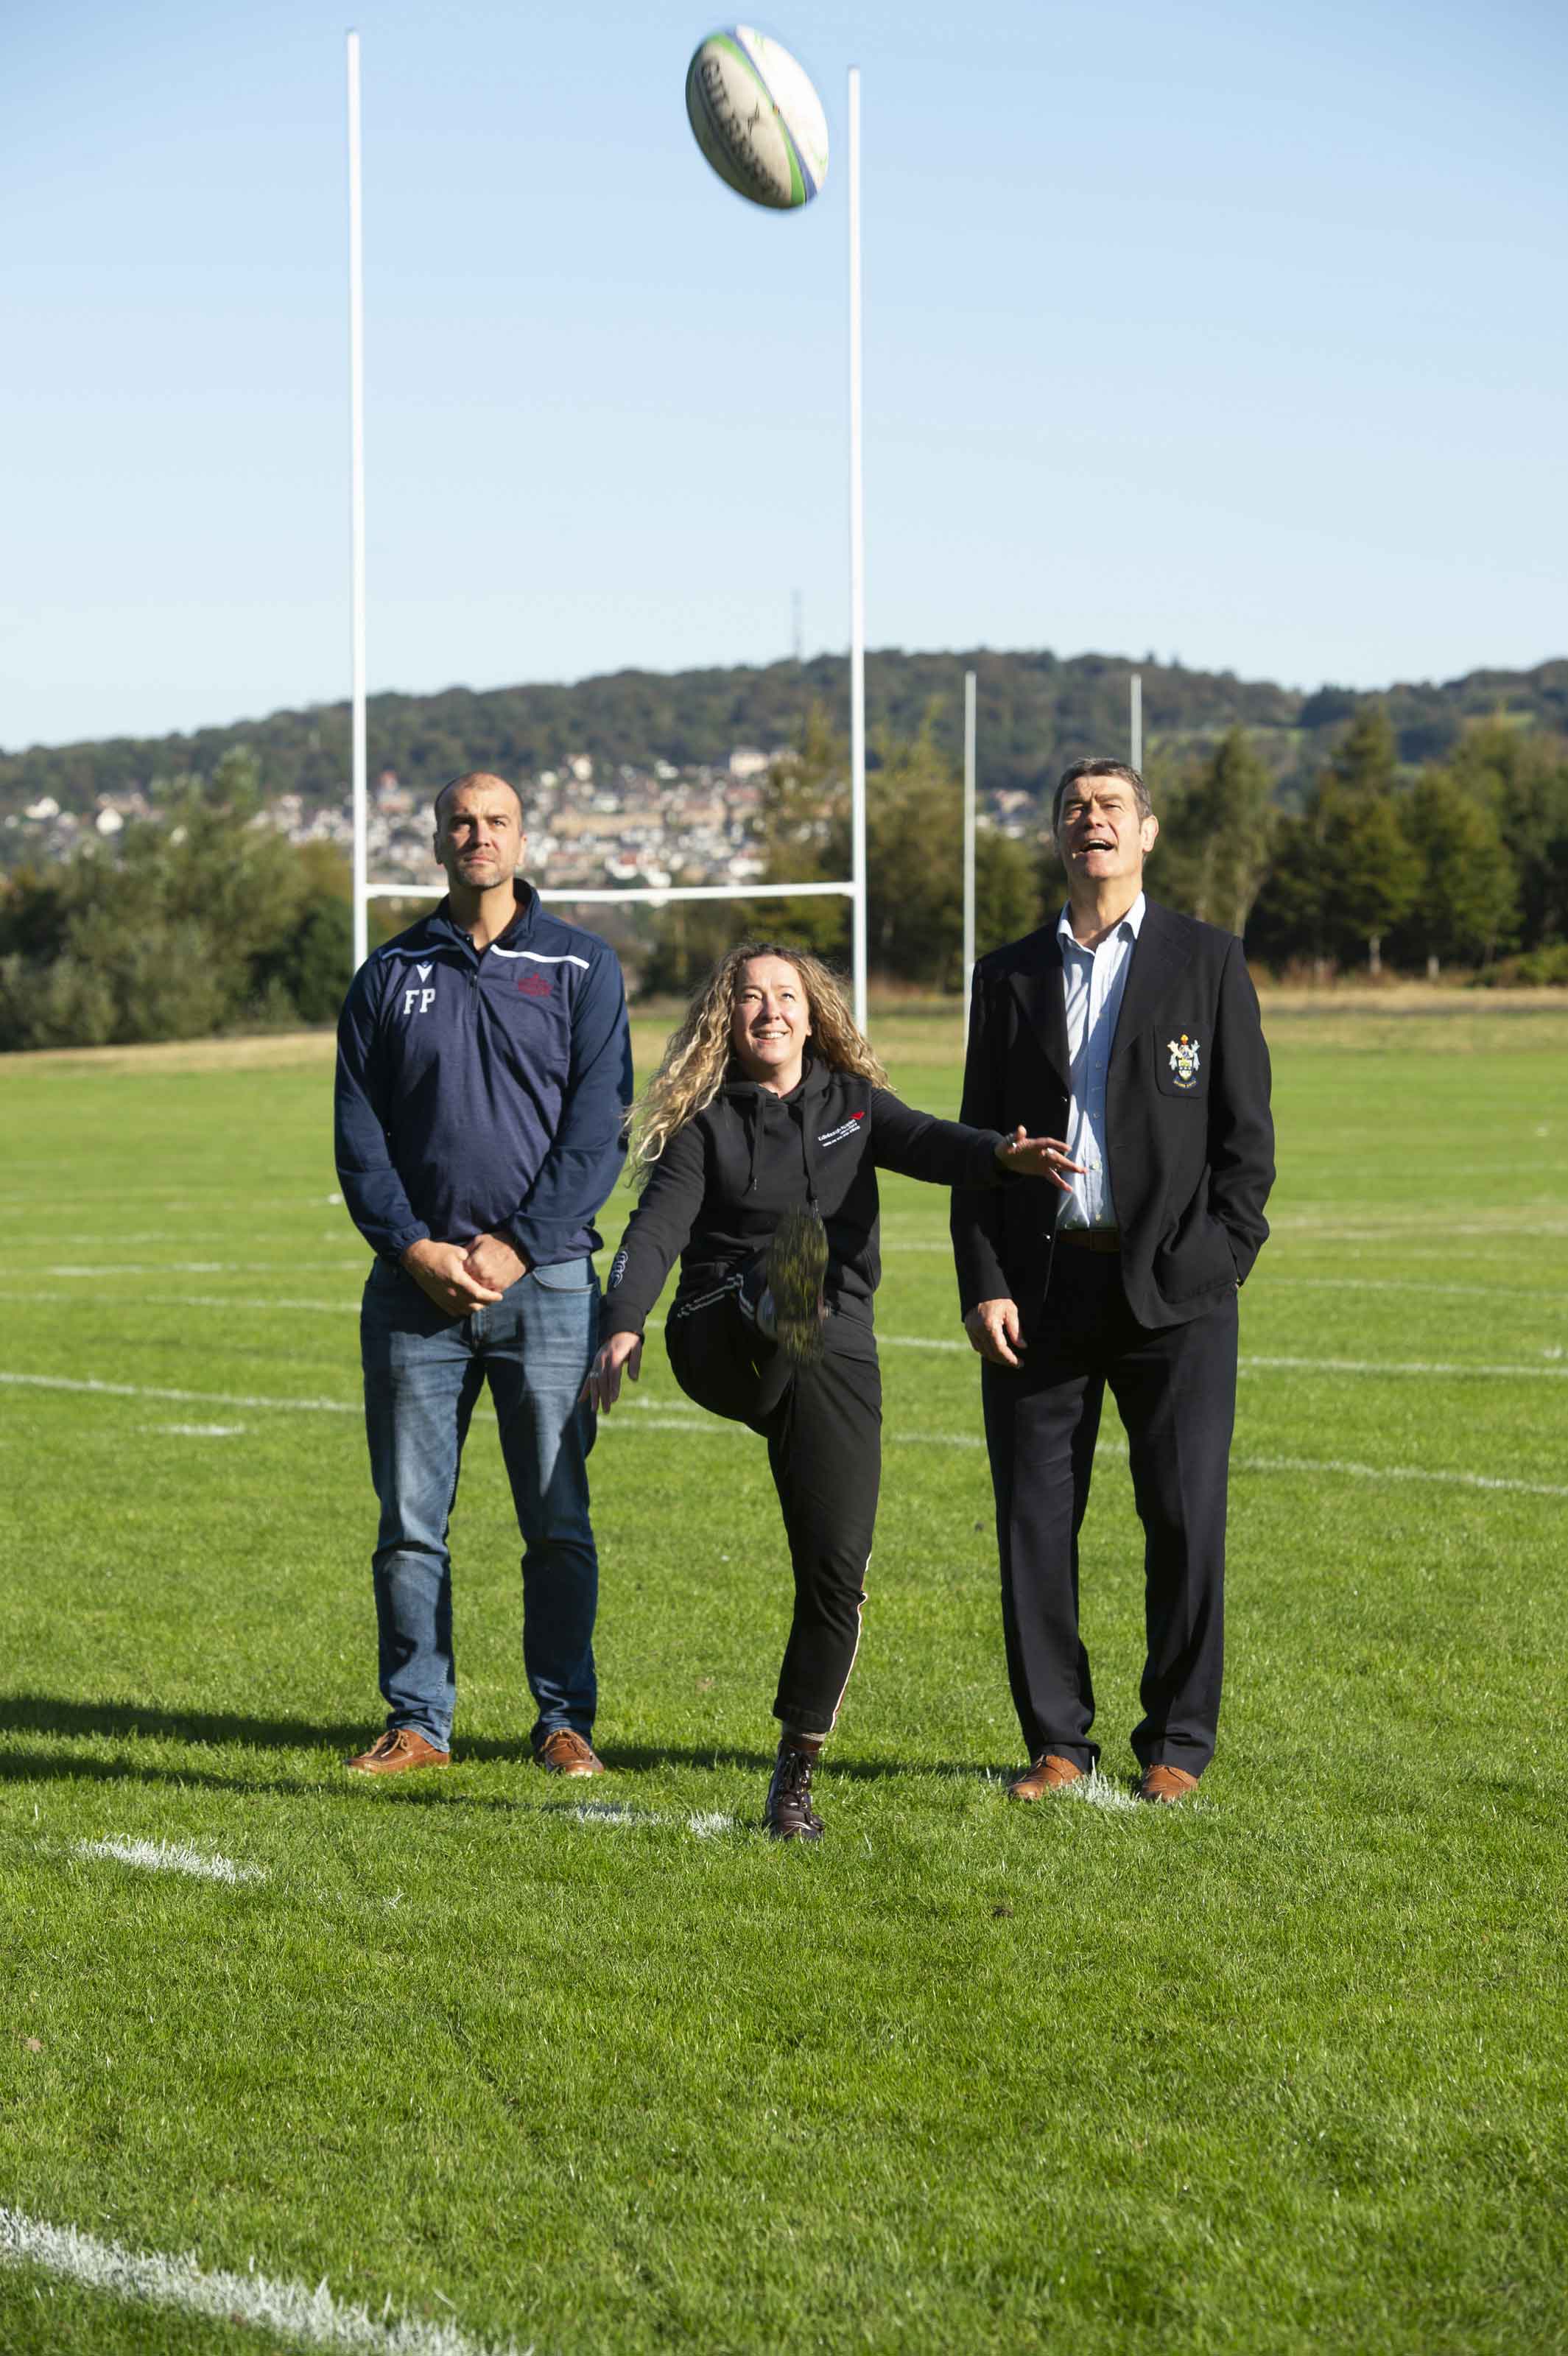 (From left to right) Fergus Pringle (head coach of Watsonians Super6), Dr Susan Brown (Edinburgh Napier University lead for the Strategy for Sport) and Euan Kennedy (president, Watsonians Rugby Club).